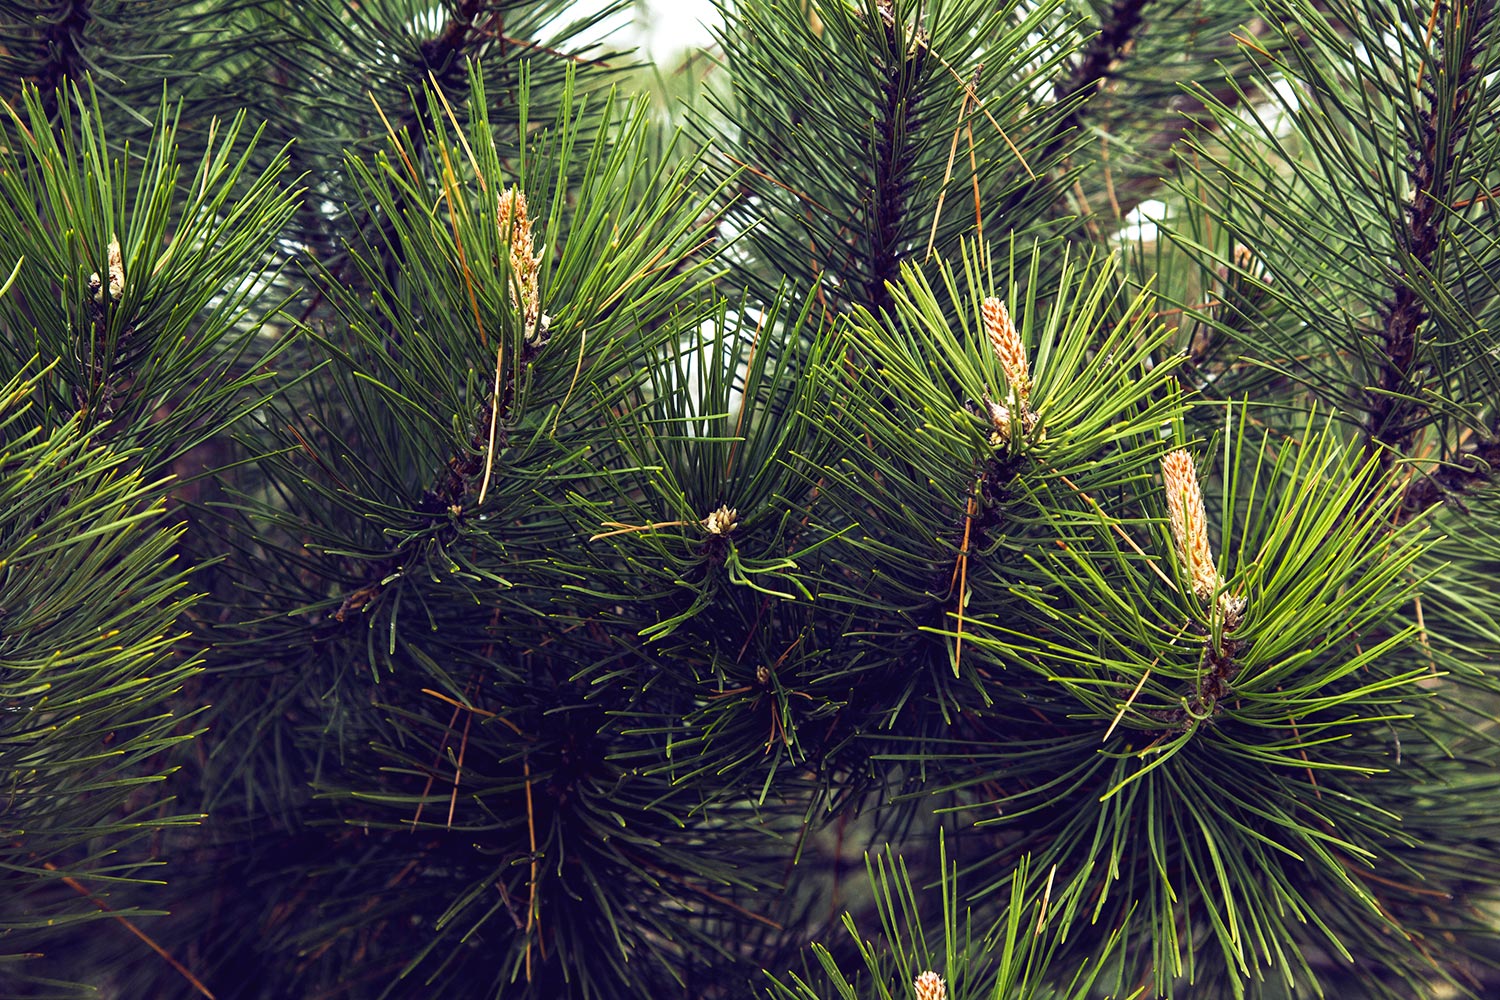 Close up image of a pine needles